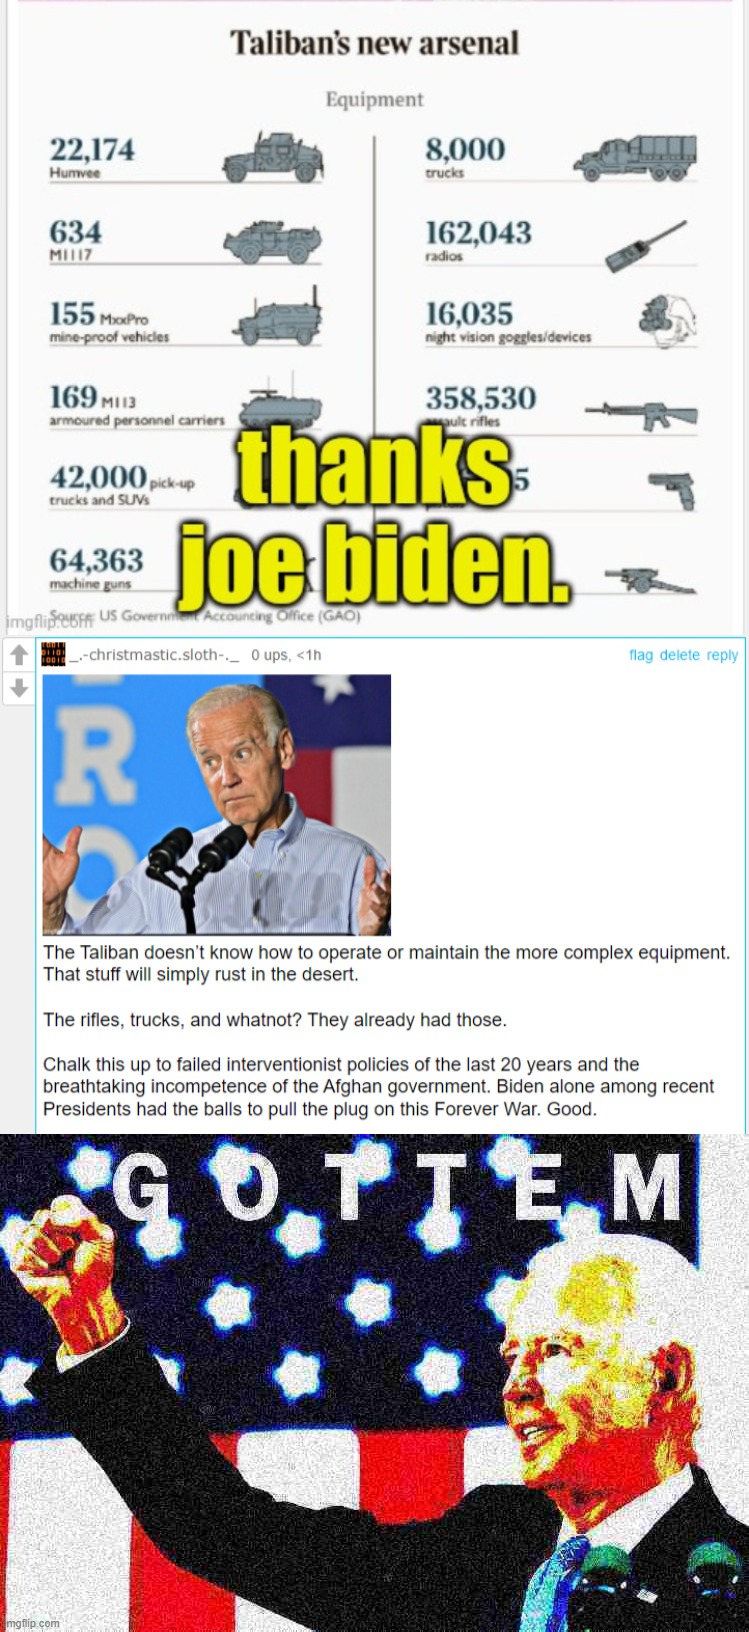 The Taliban captured radios, night vision goggles, rifles, trucks, and some shit they can't use. Oh noes! | image tagged in taliban's new arsenal,taliban's new arsenal debunked,joe biden gottem 2 deep-fried 1,taliban,conservative logic,military | made w/ Imgflip meme maker